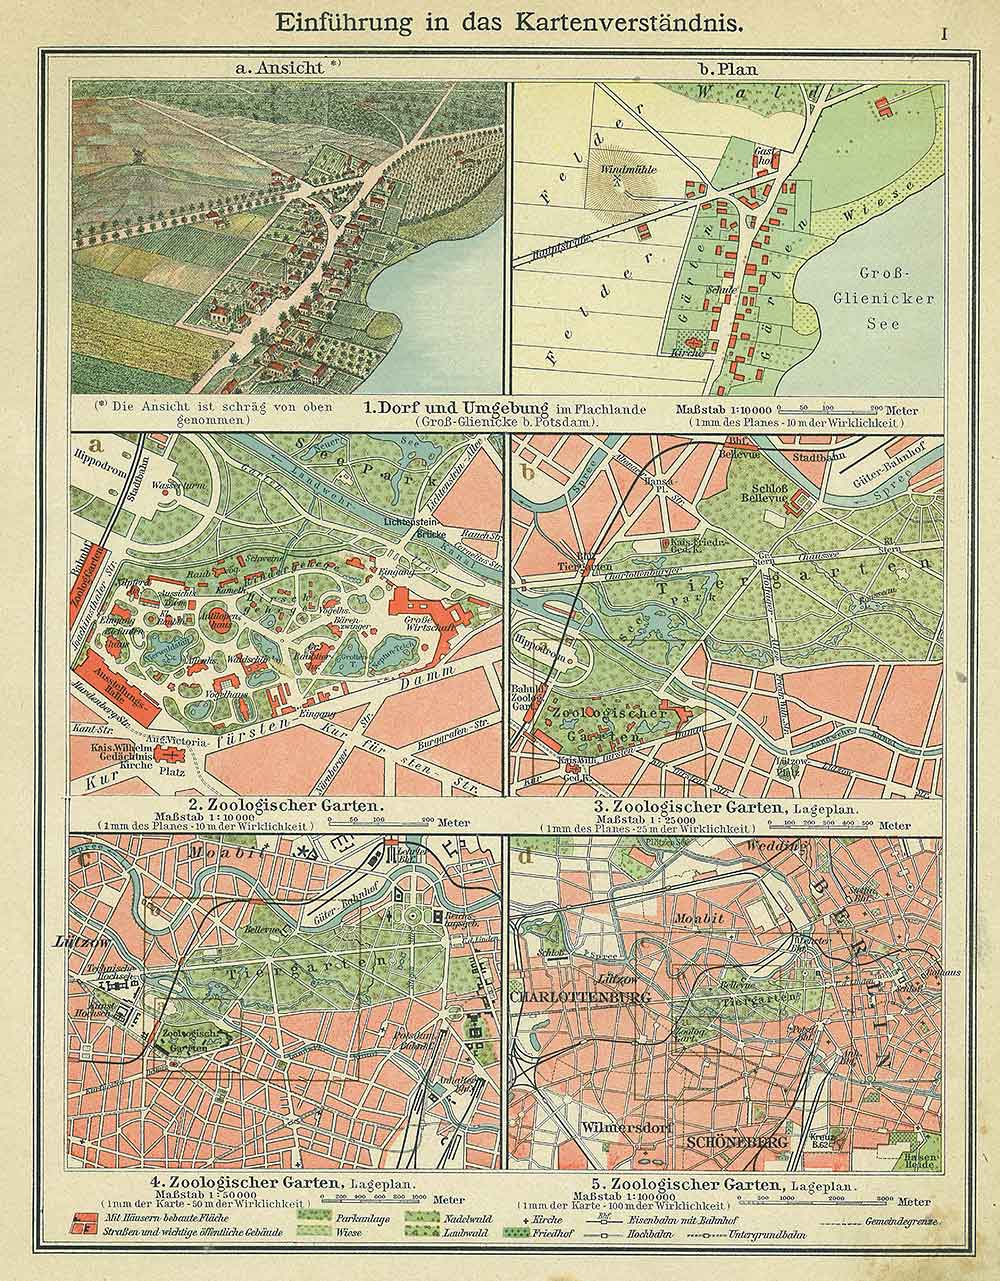 Einfuhrung in das Kartenverstandnis of Andrees 'Berliner Schul-Atlas', 1916, published size to print borders 19.06 cm wide by 25.67 cm high.